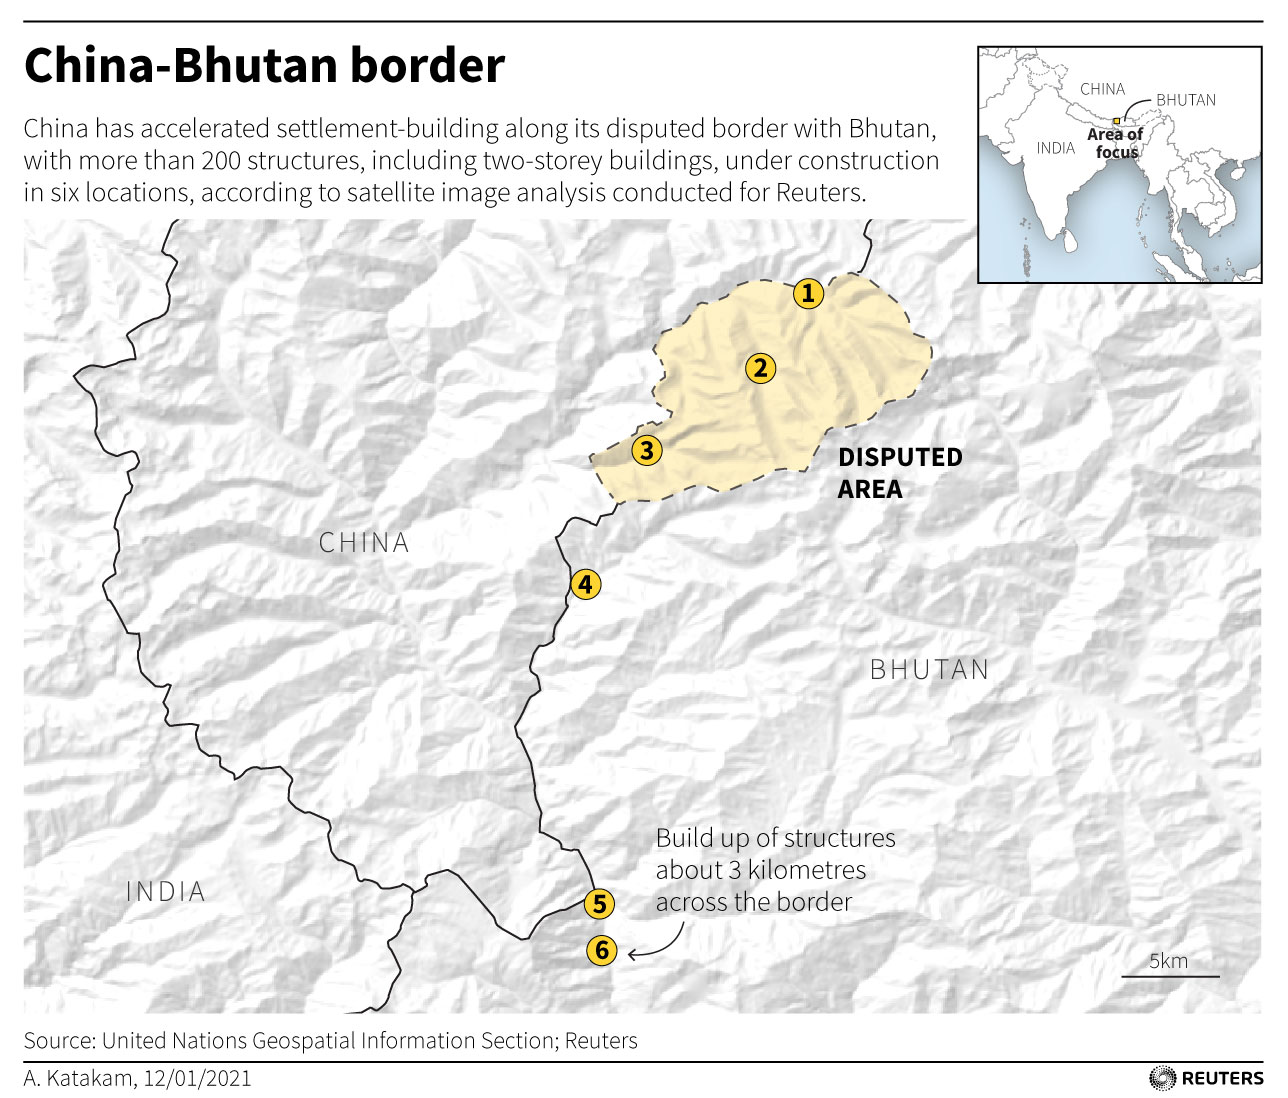 China has accelerated settlement-building along its disputed border with Bhutan, with more than 200 structures, including two-storey buildings, under construction in six locations, according to satellite image analysis conducted for Reuters.